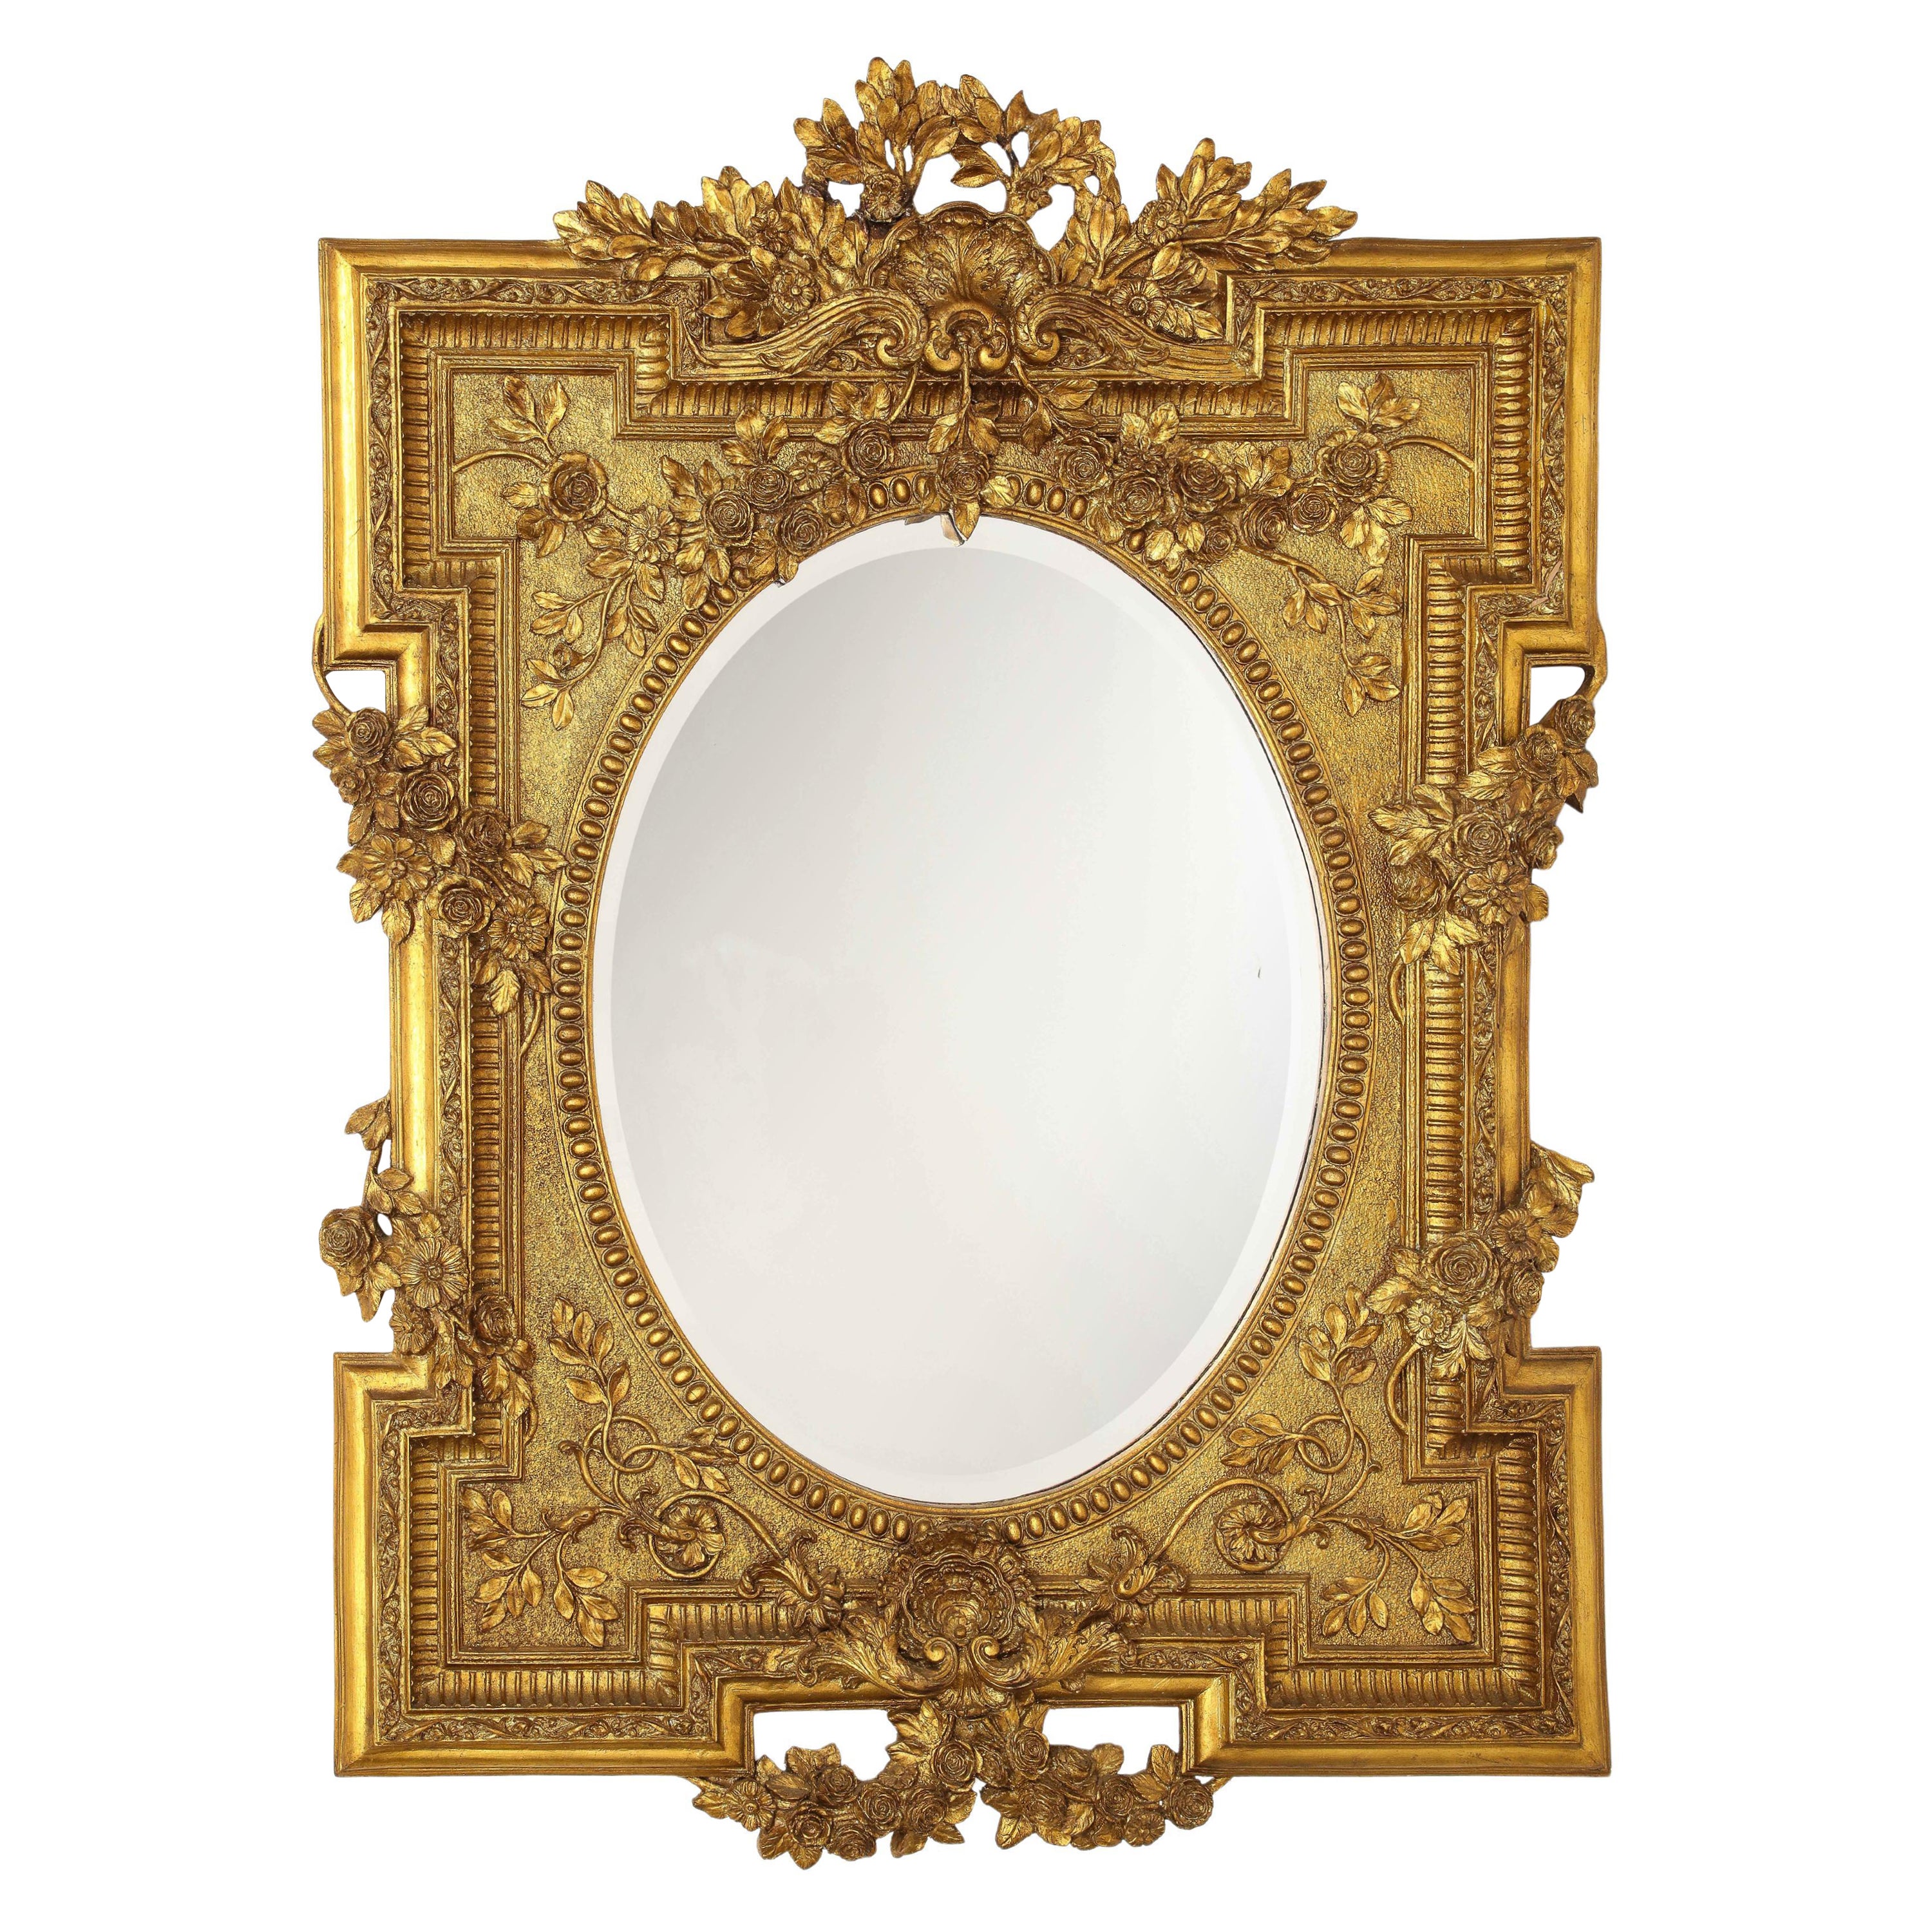 Marvelous French Giltwood Hand-Carved Beveled Mirror with Floral Vine Designs